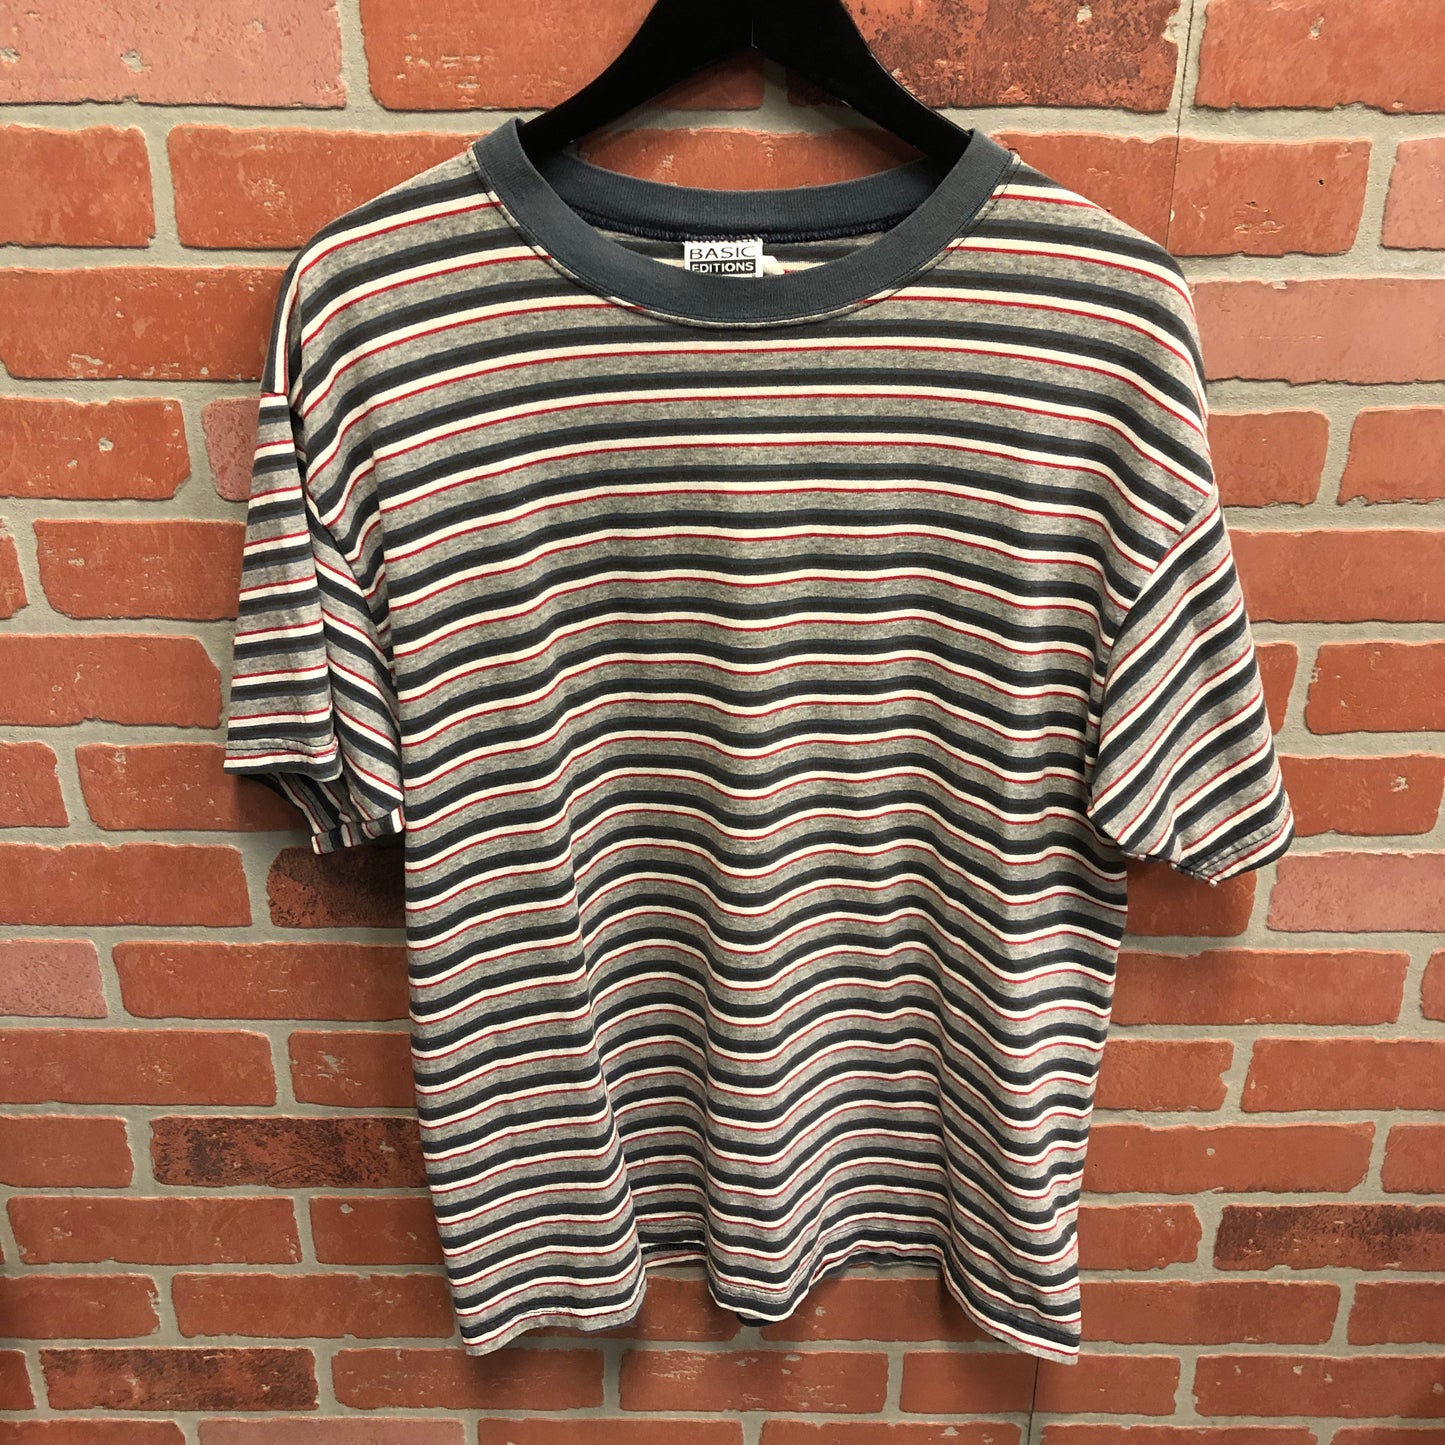 Basic Editions Striped Tee